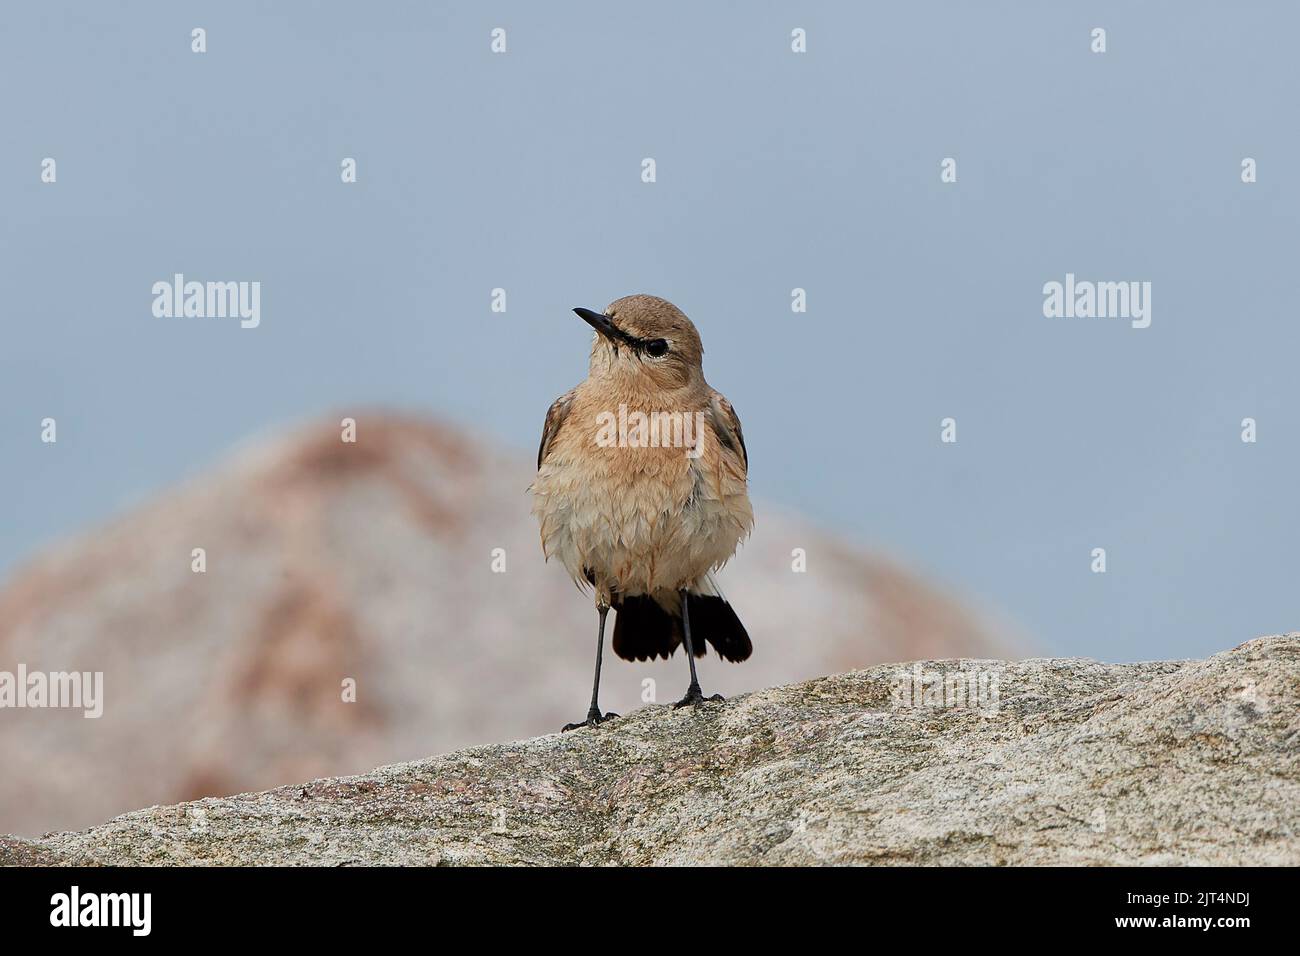 Isabelline wheatear in its natural habitat at the beach Stock Photo